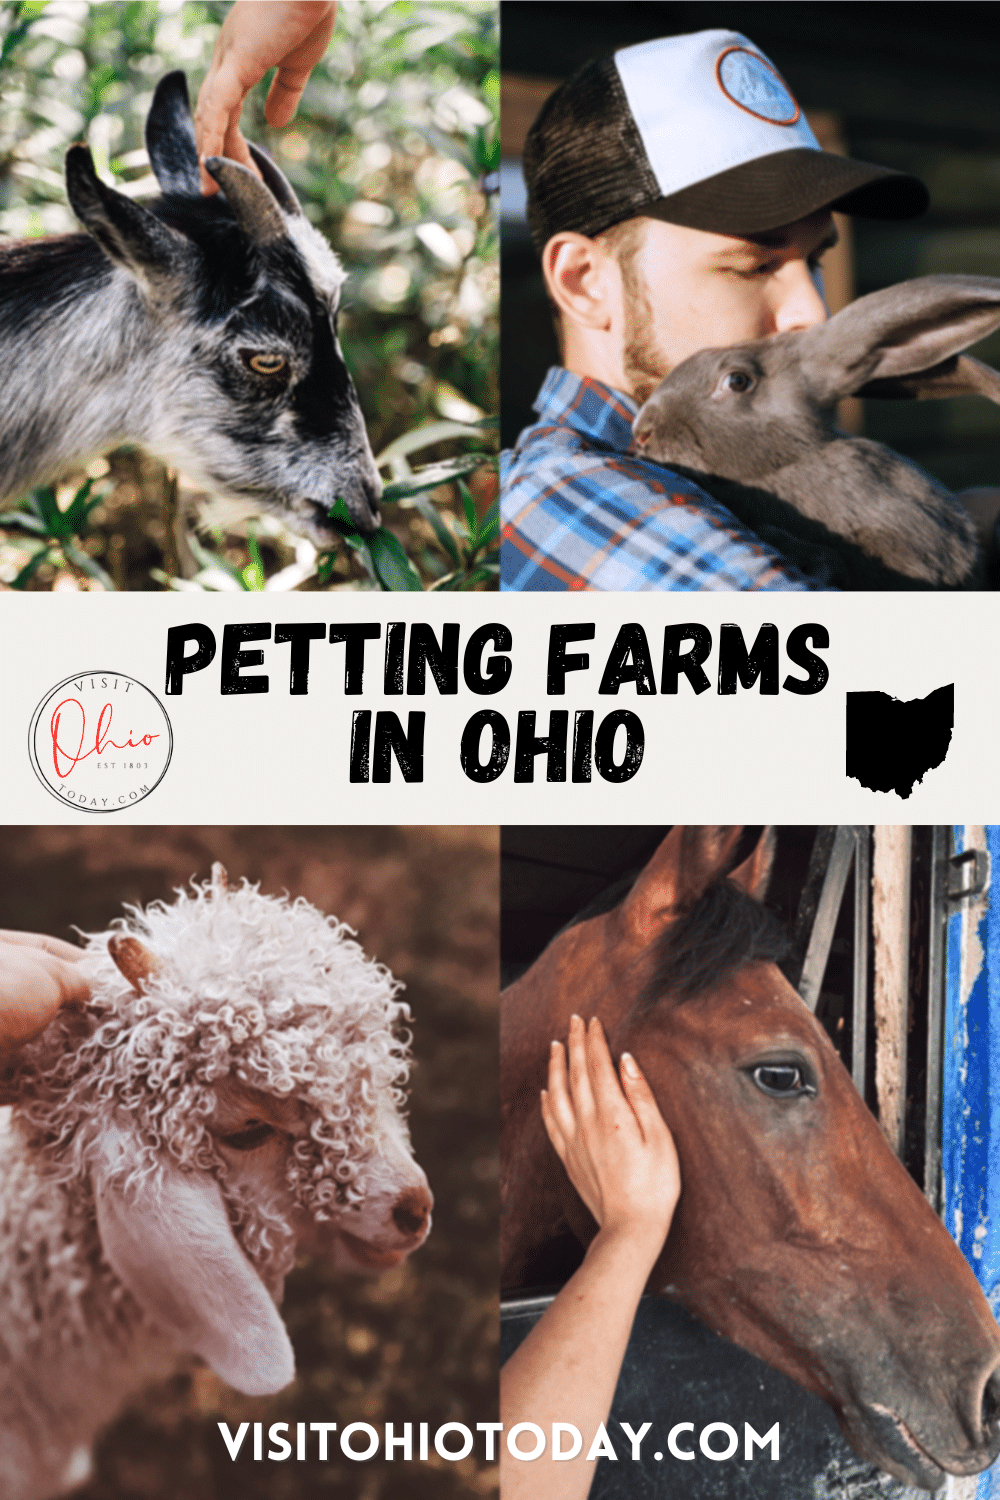 Petting Farms in Ohio are some of the best places you can ever visit. Not only are they full of wonderful animals, but they are also educational as well. The kids will enjoy the interaction with the animals at the petting farms.